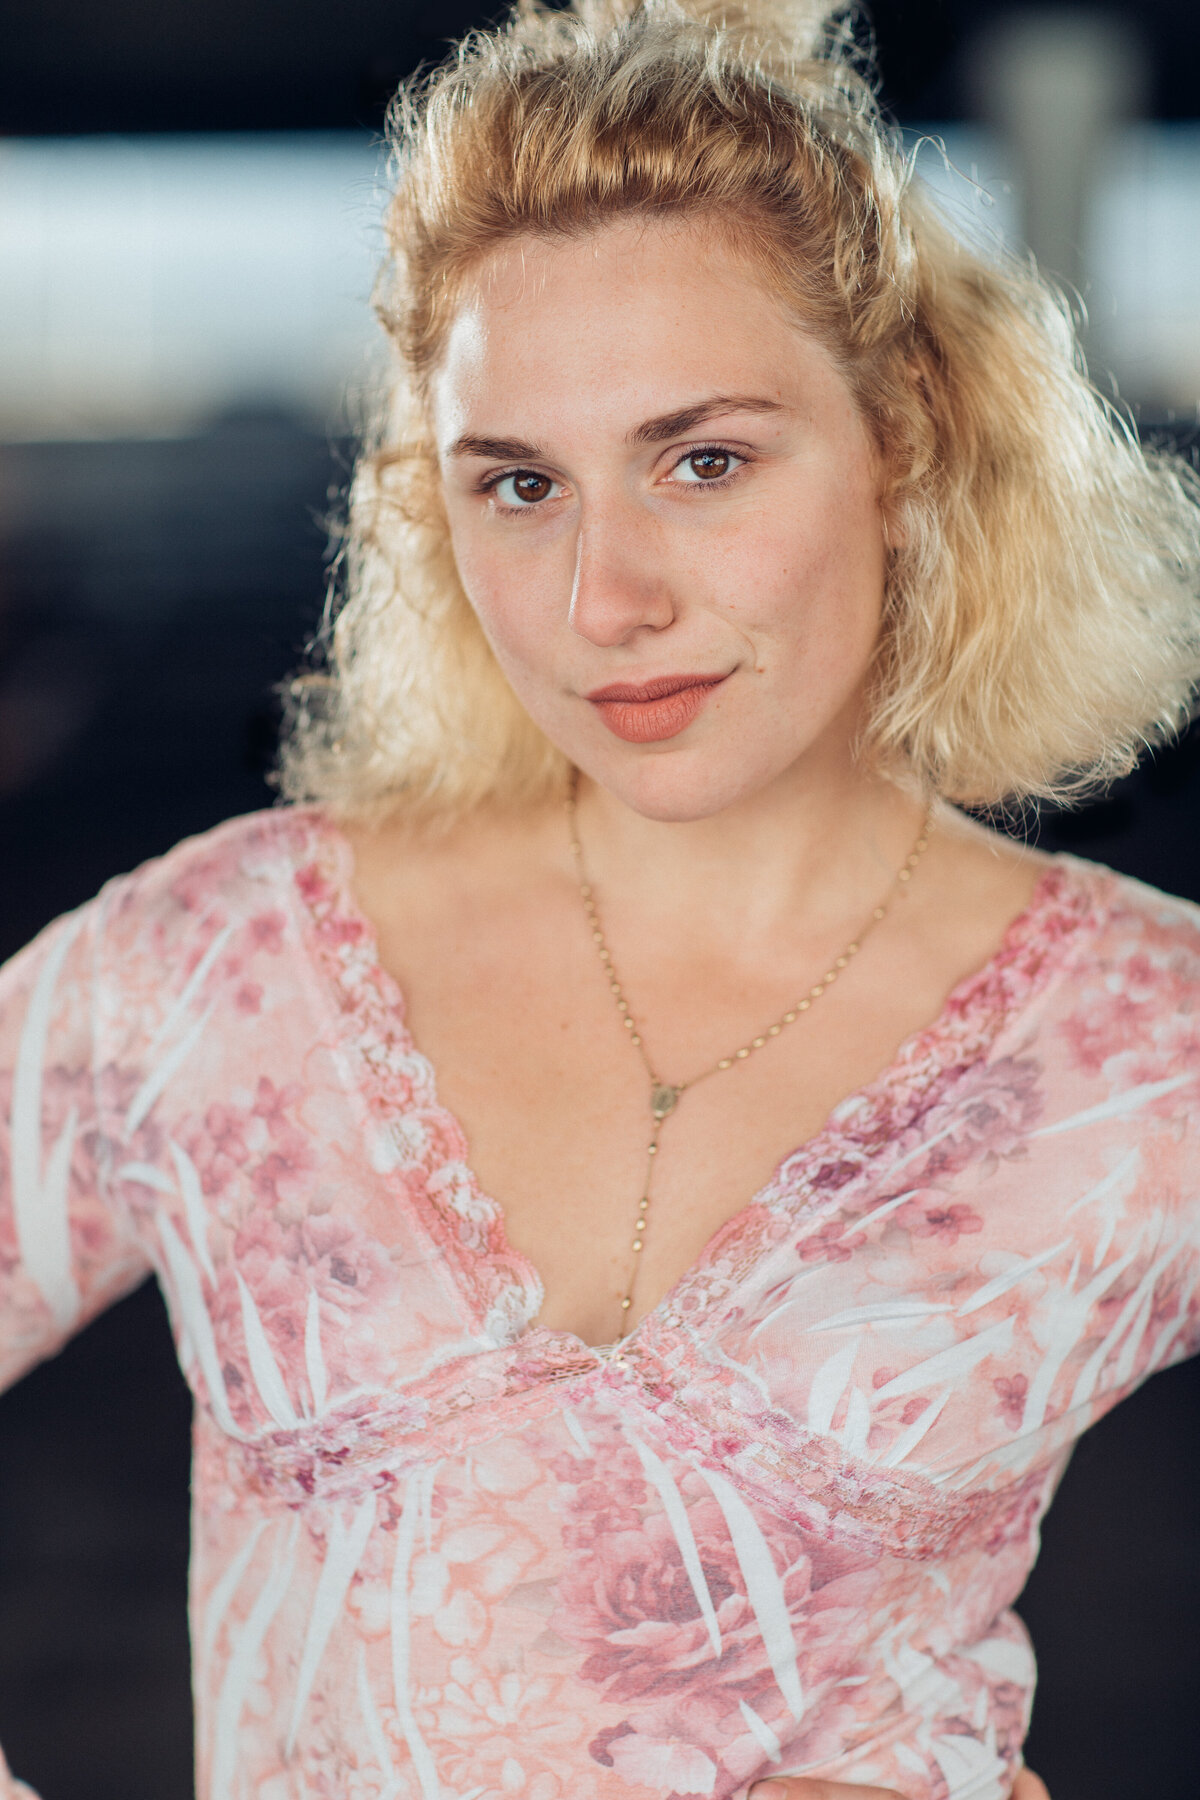 Headshot Photograph Of Young Woman In Pink V-Neck Blouse Los Angeles